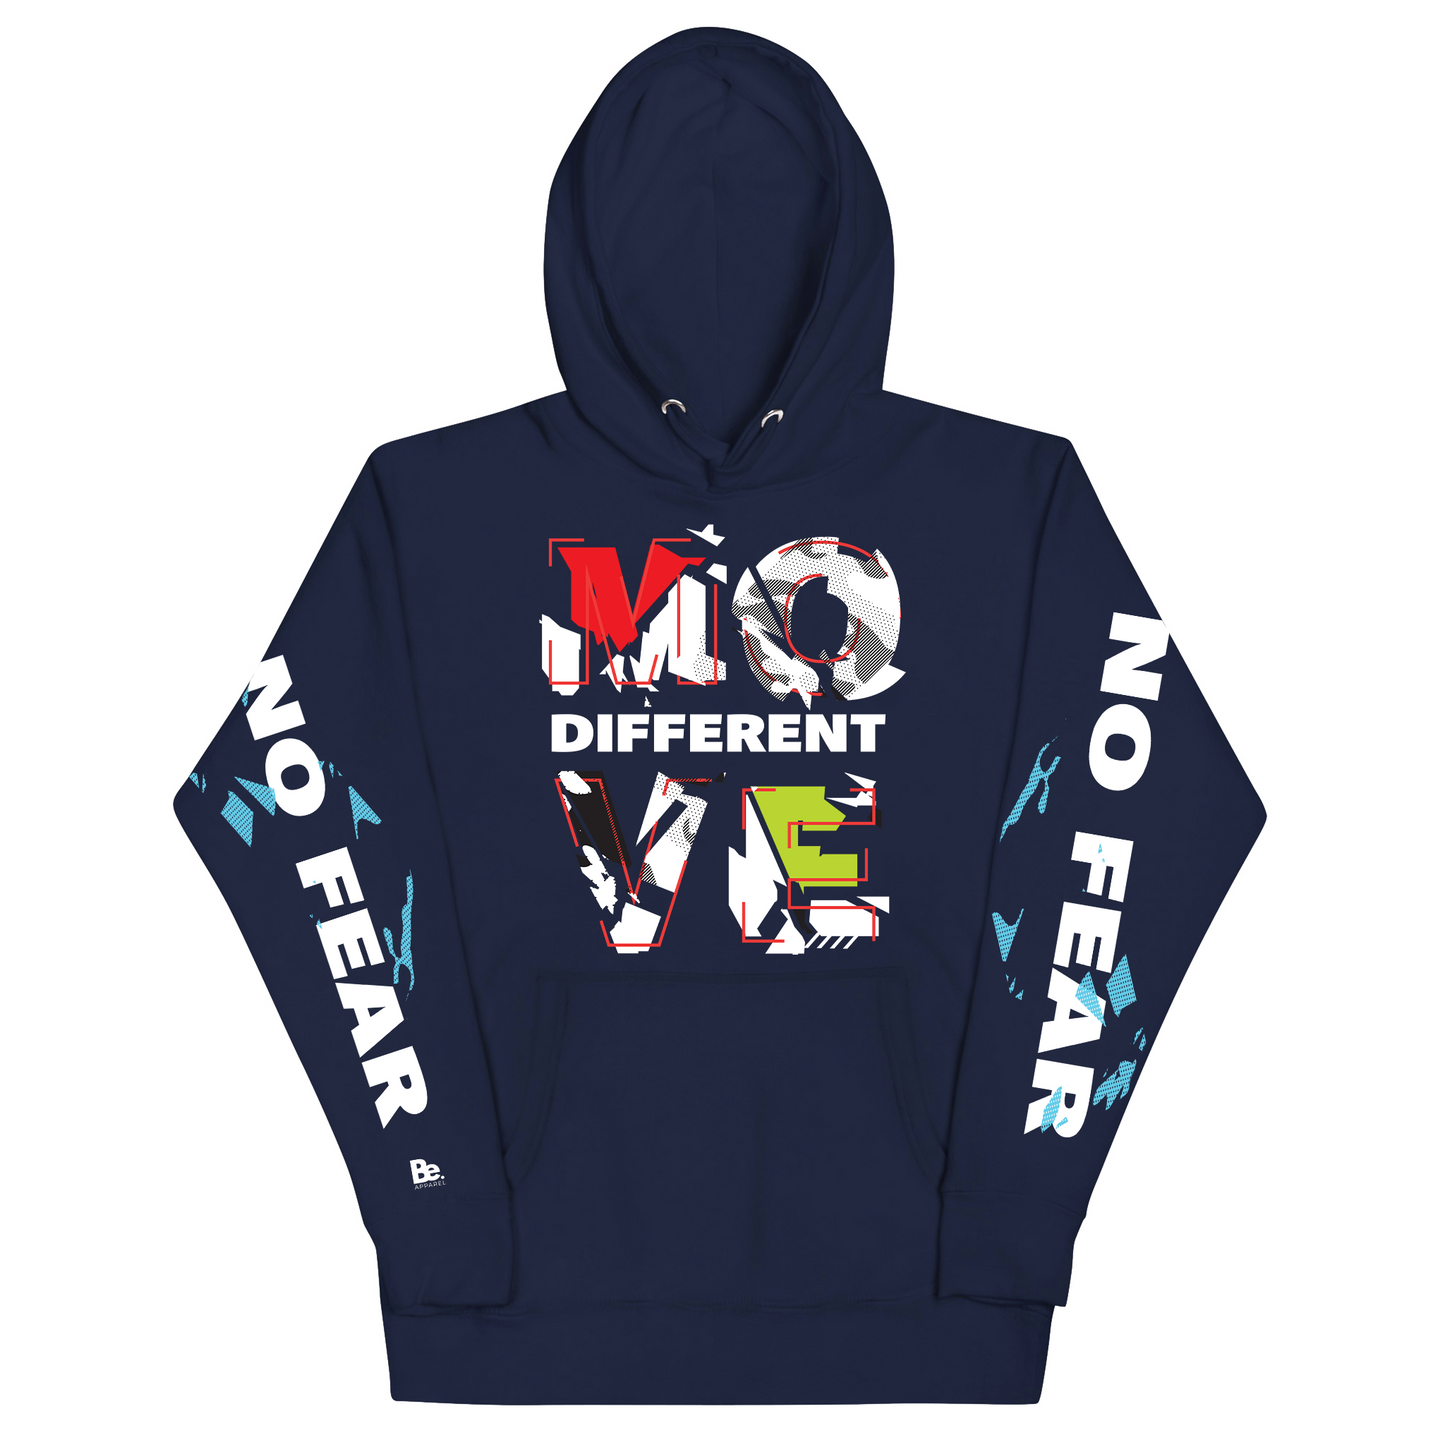 ABSTRACT MOVE DIFFERENT NO FEAR HOODIE- UNISEX